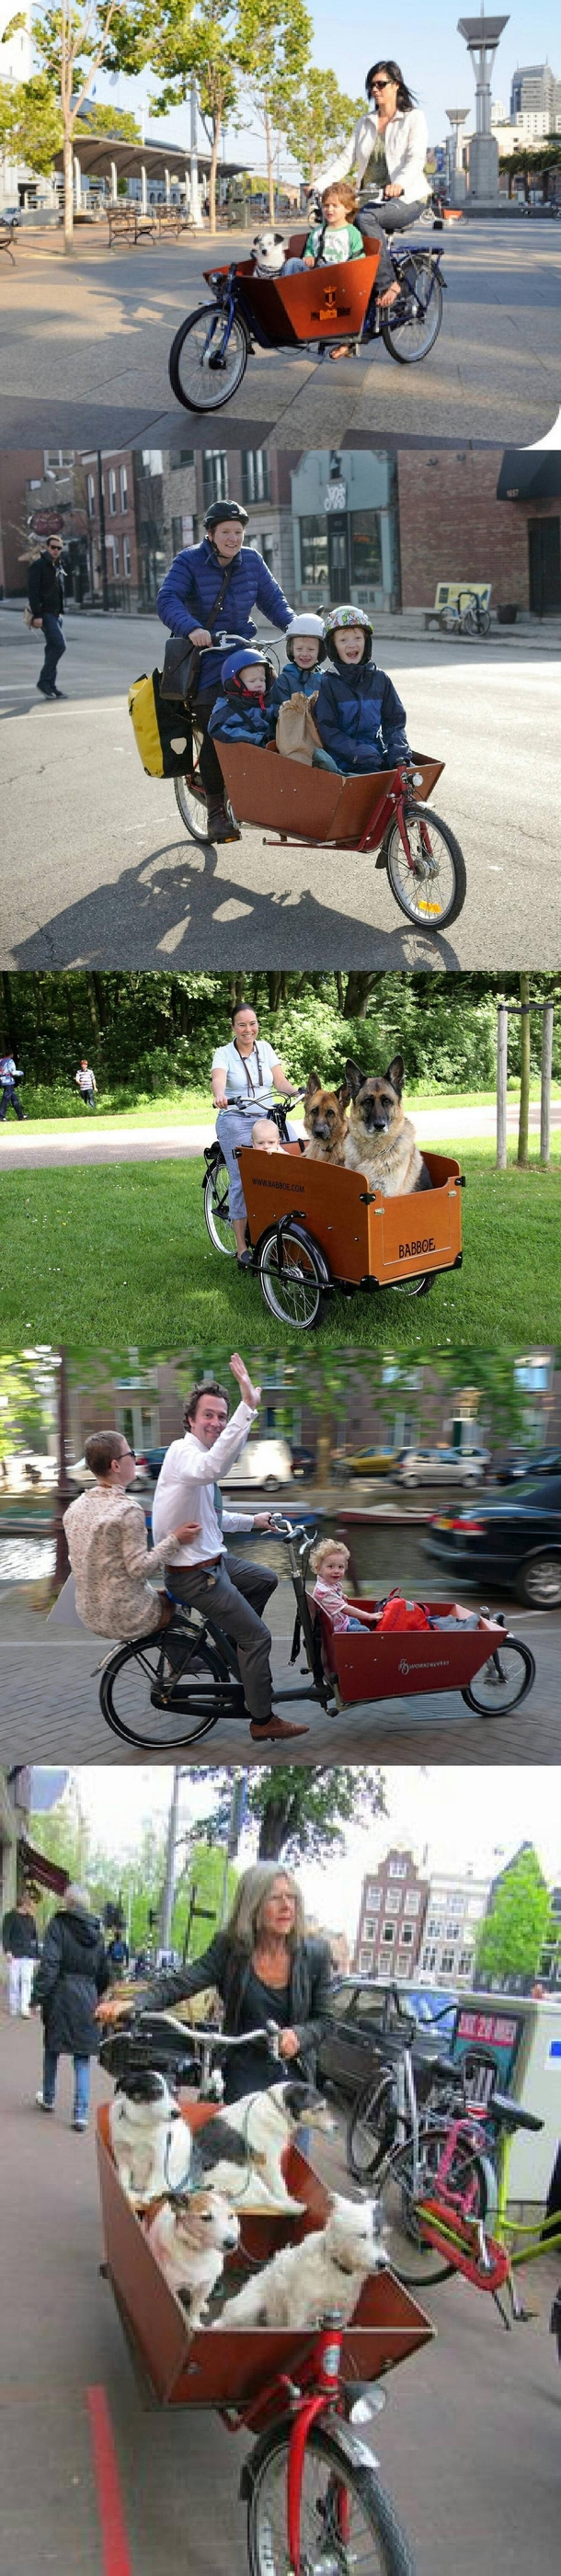 This is how they transport kids and dogs in the Netherlands